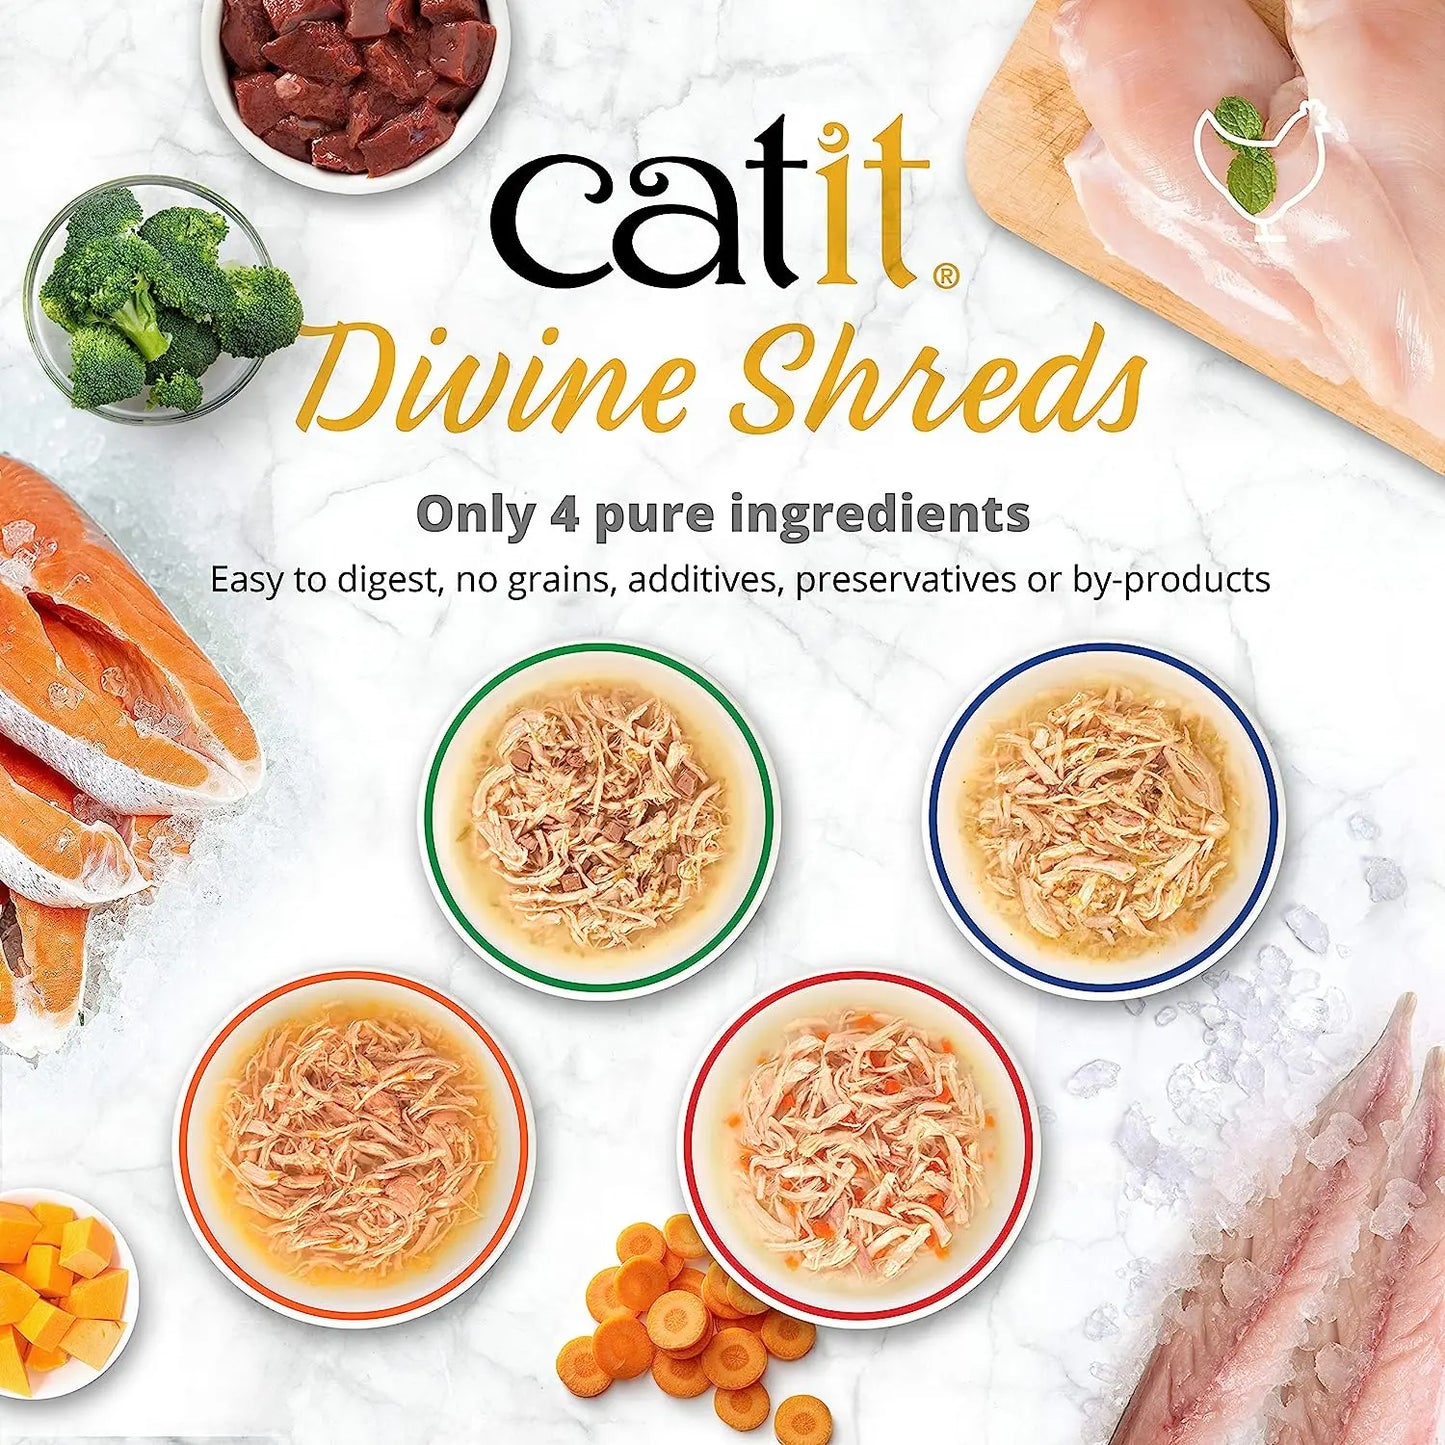 Catit Divine Shreds Chicken with Liver and Broccoli CatIt